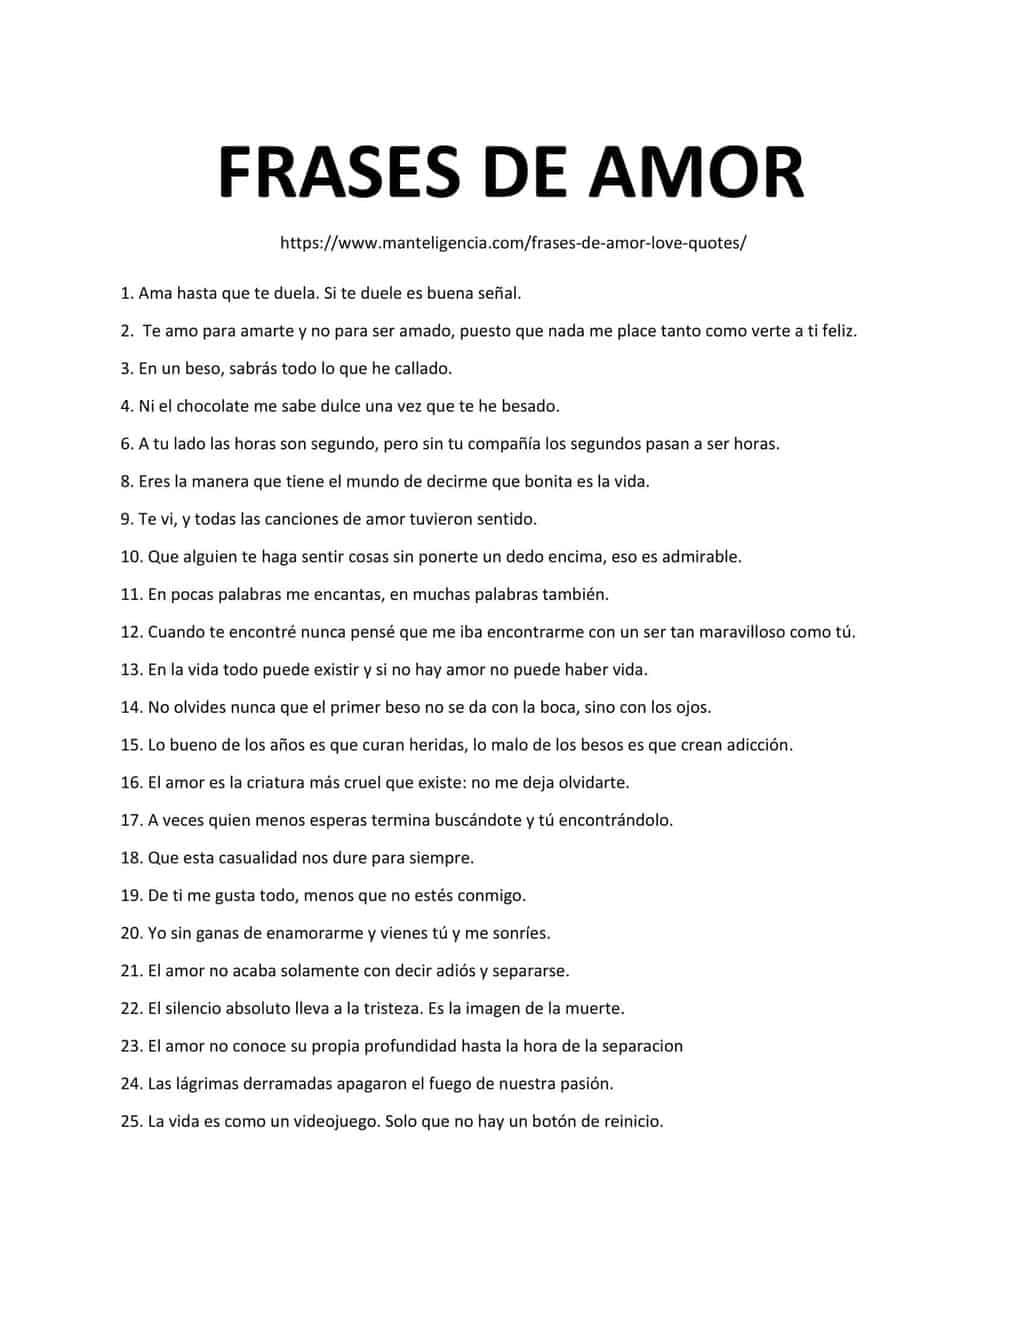 Downloadable and printable list of frases de amor as jpg or pdf